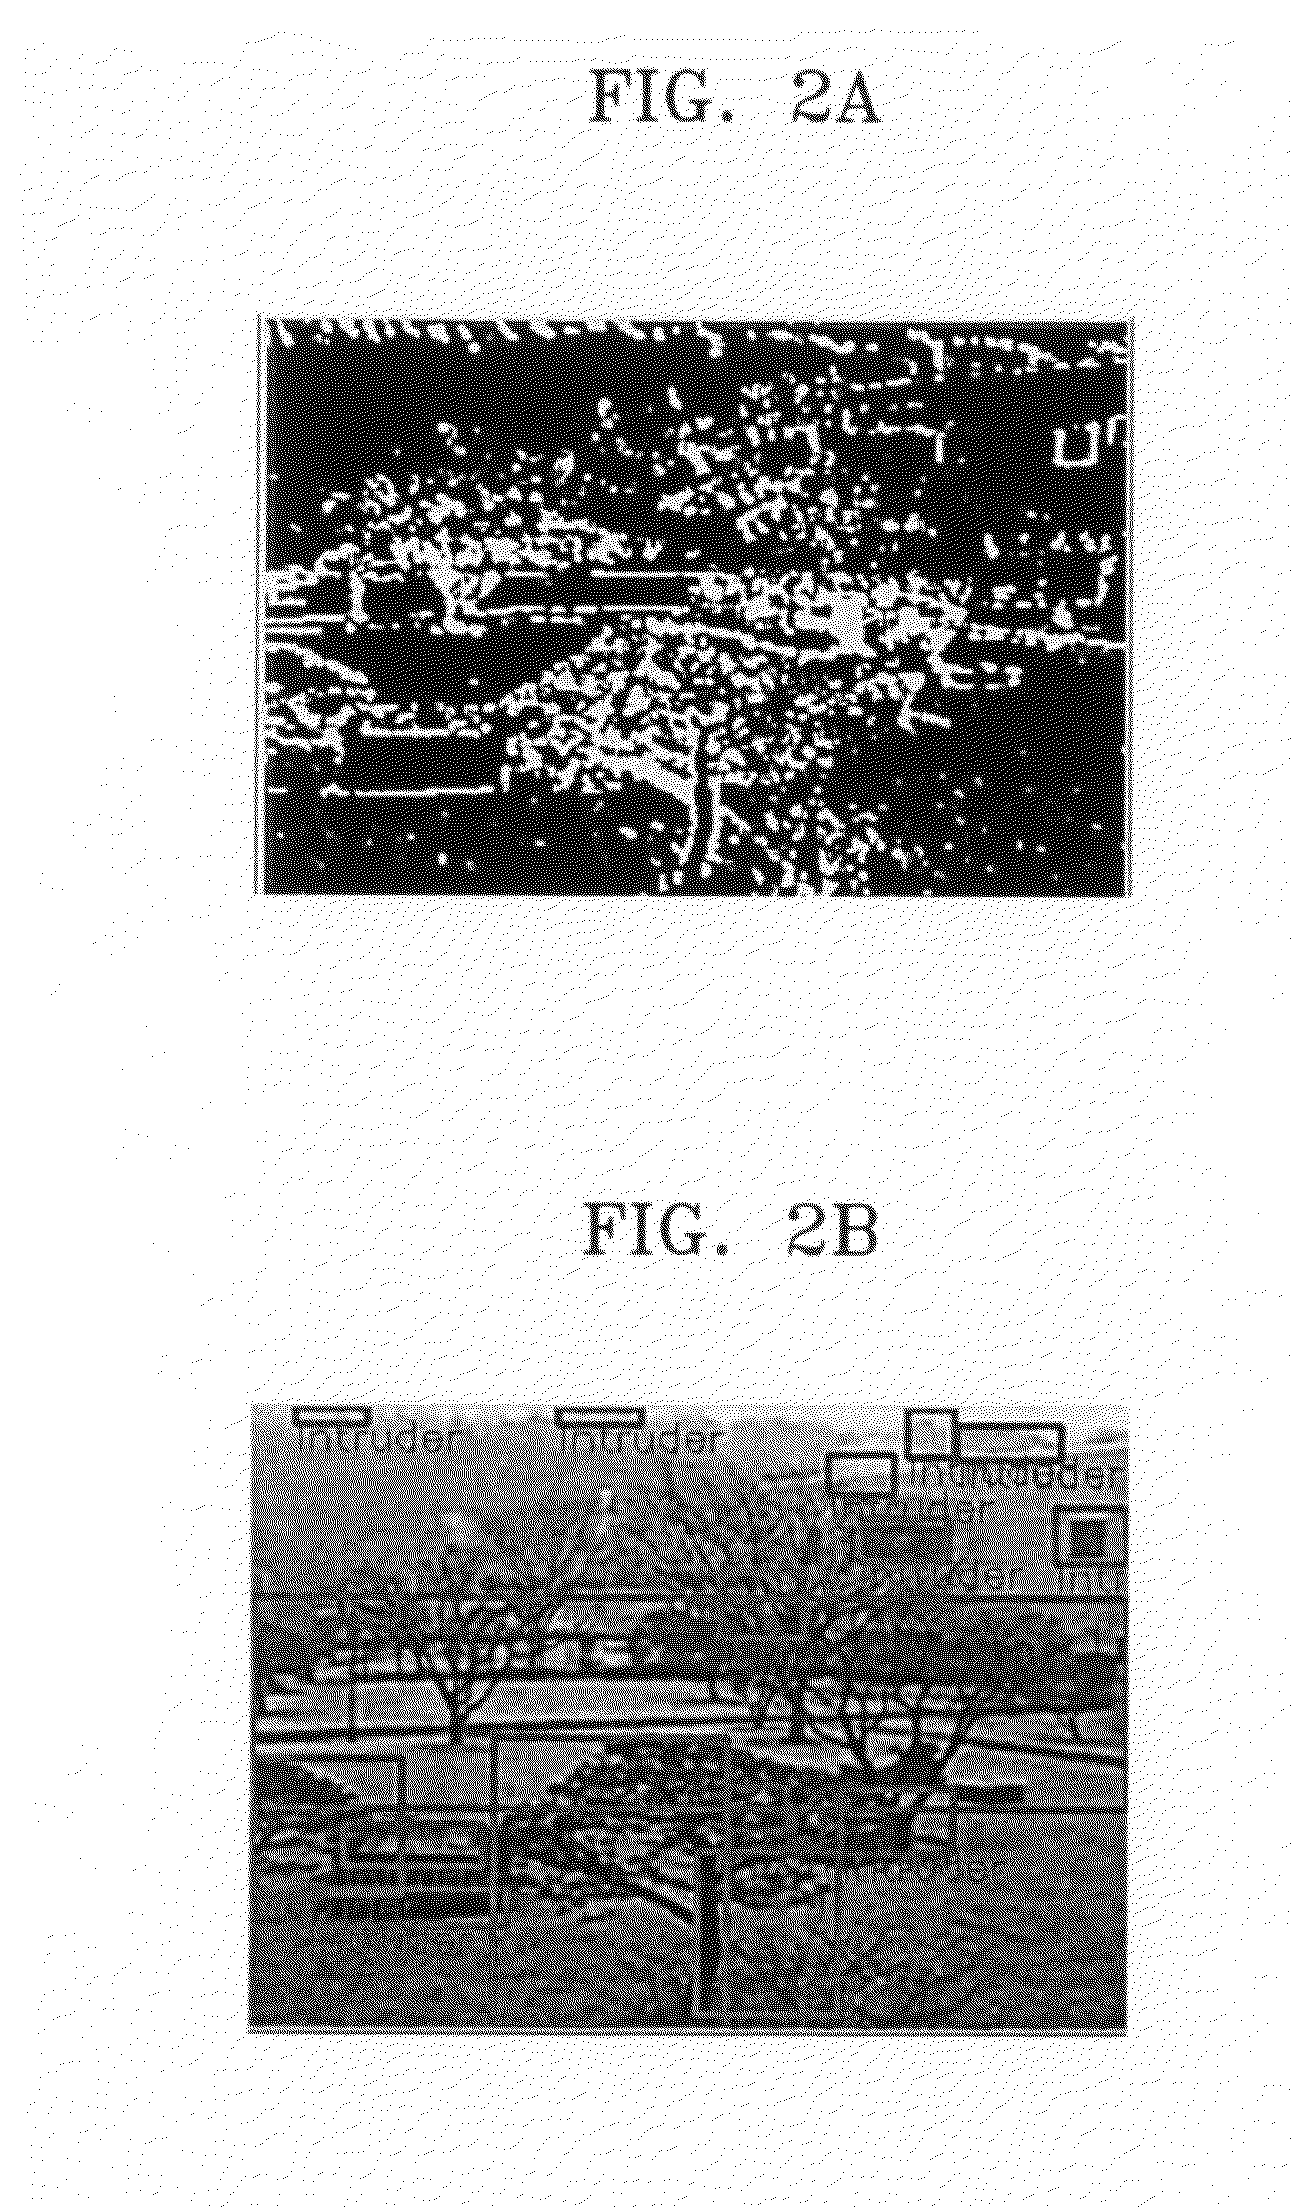 Method, medium, and apparatus with estimation of background change